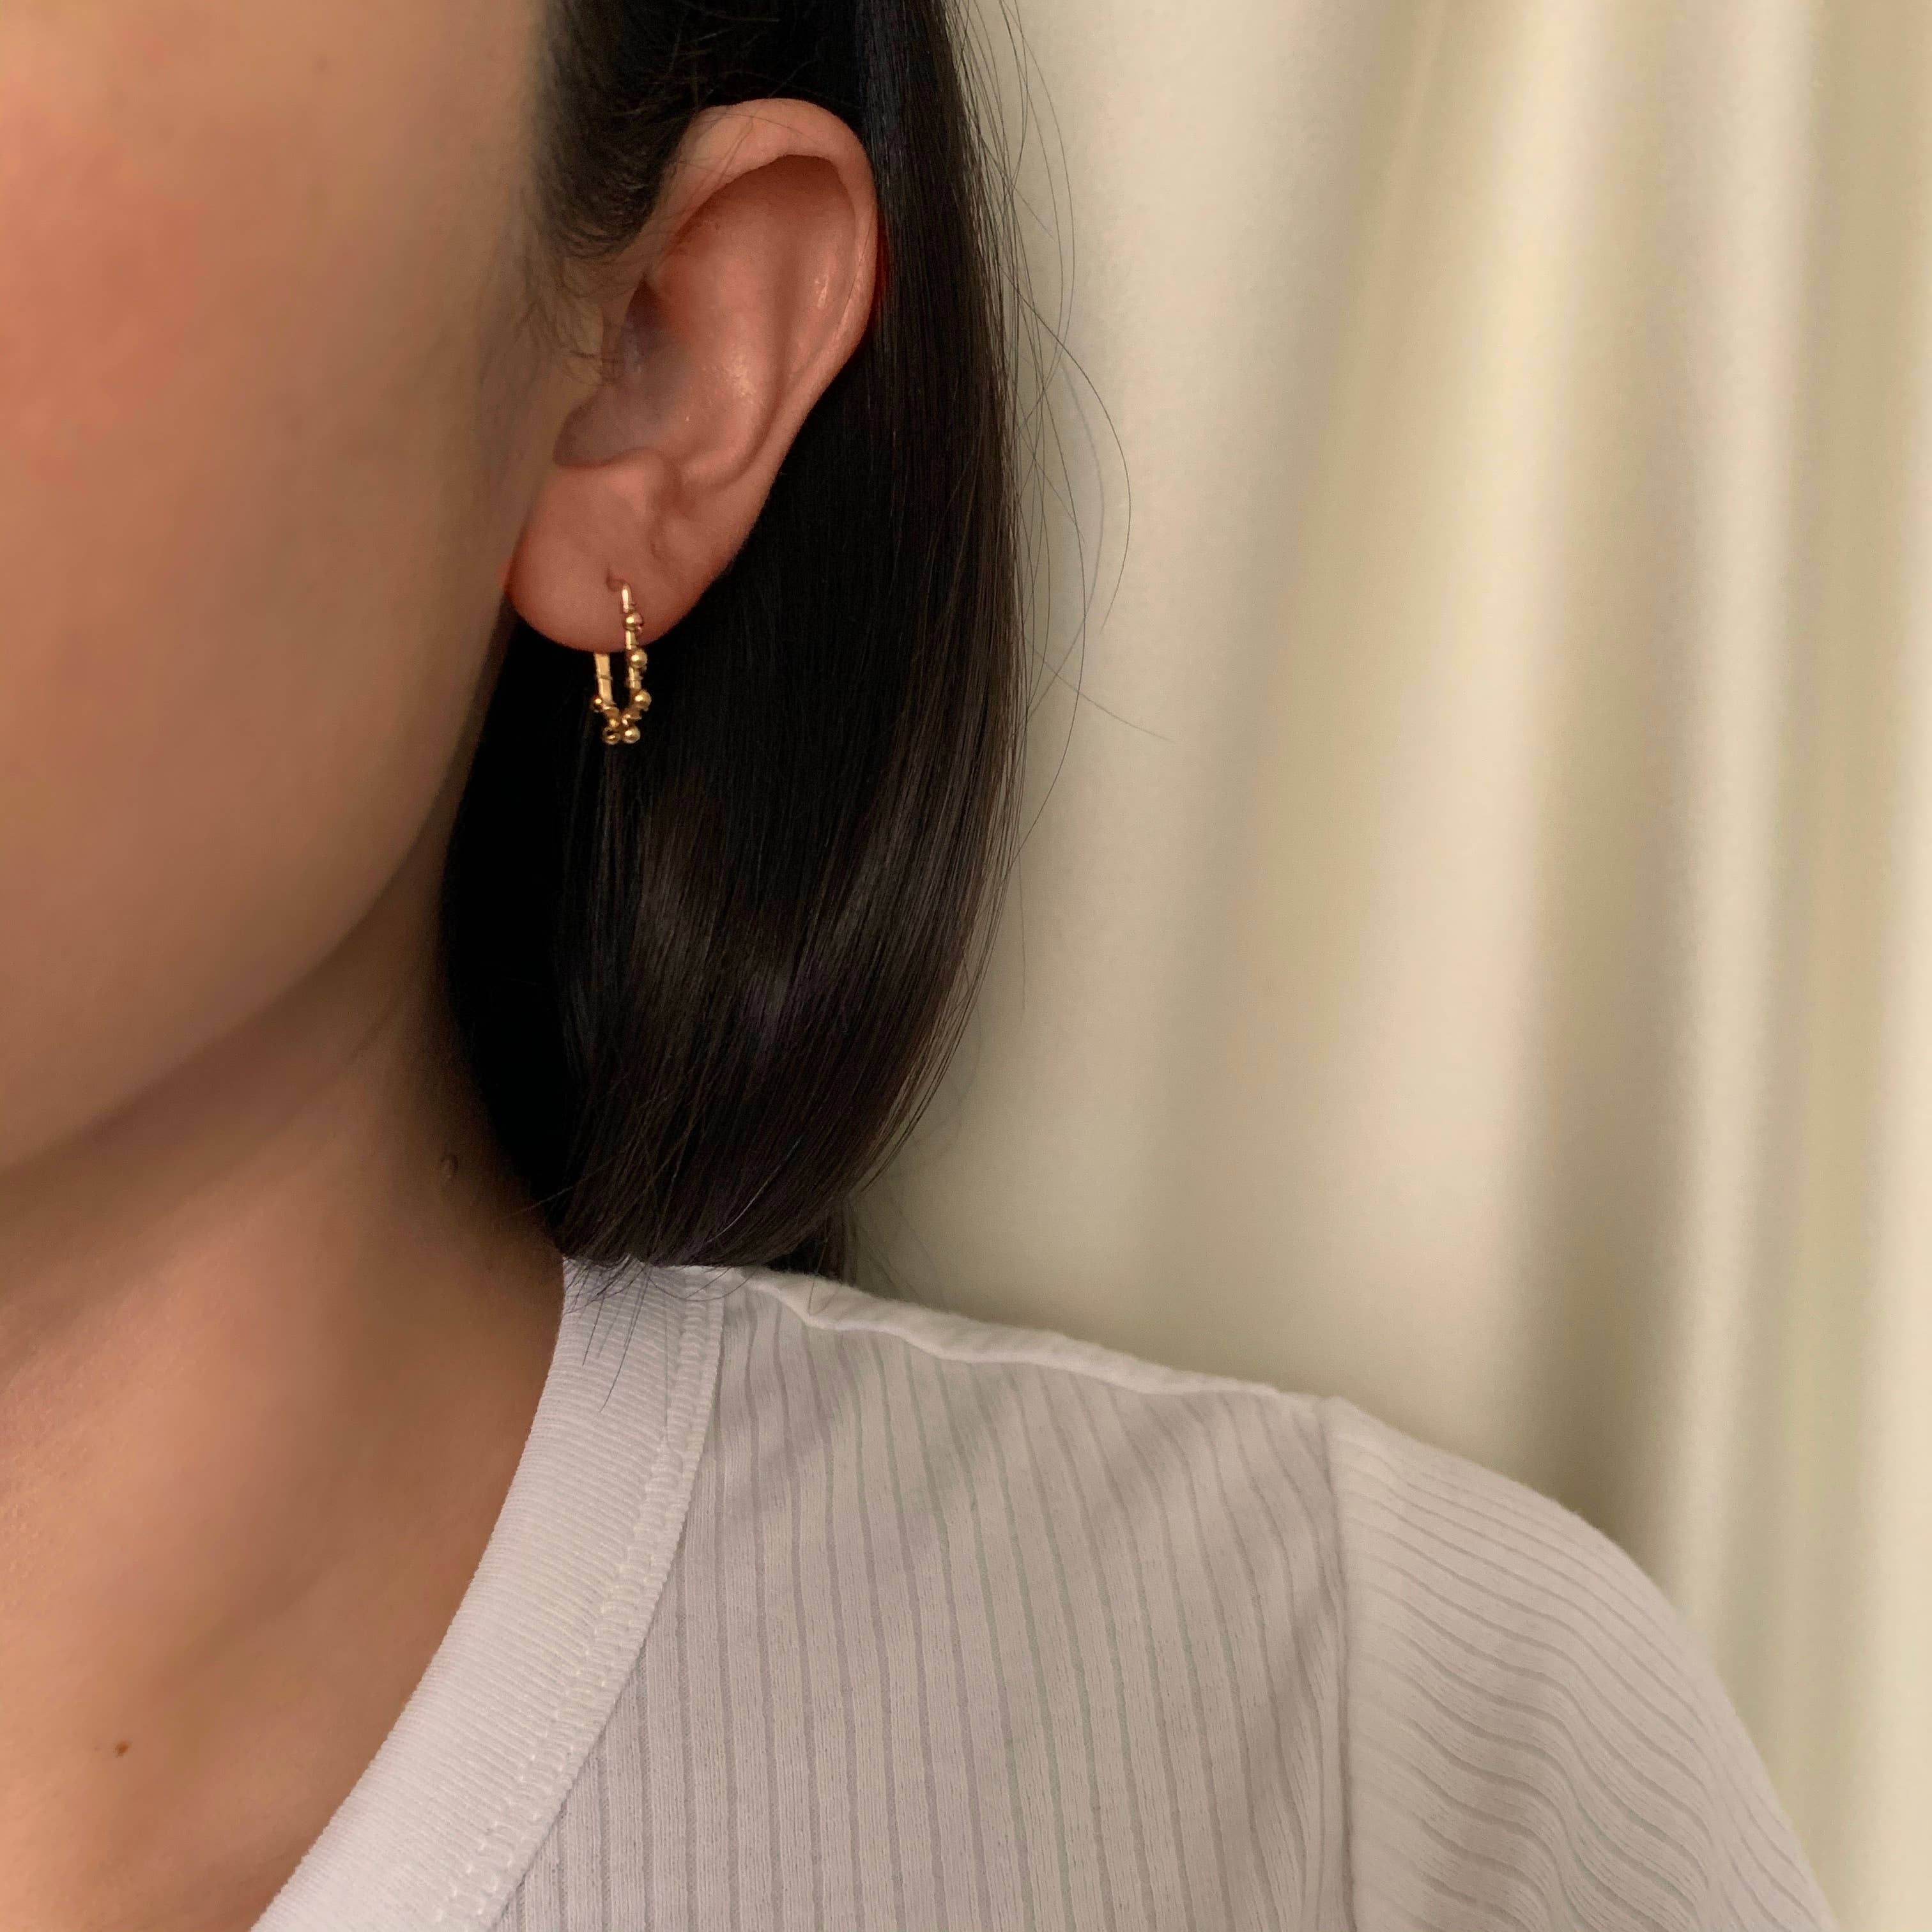 The Mini Fig Studs by Points Jewelry